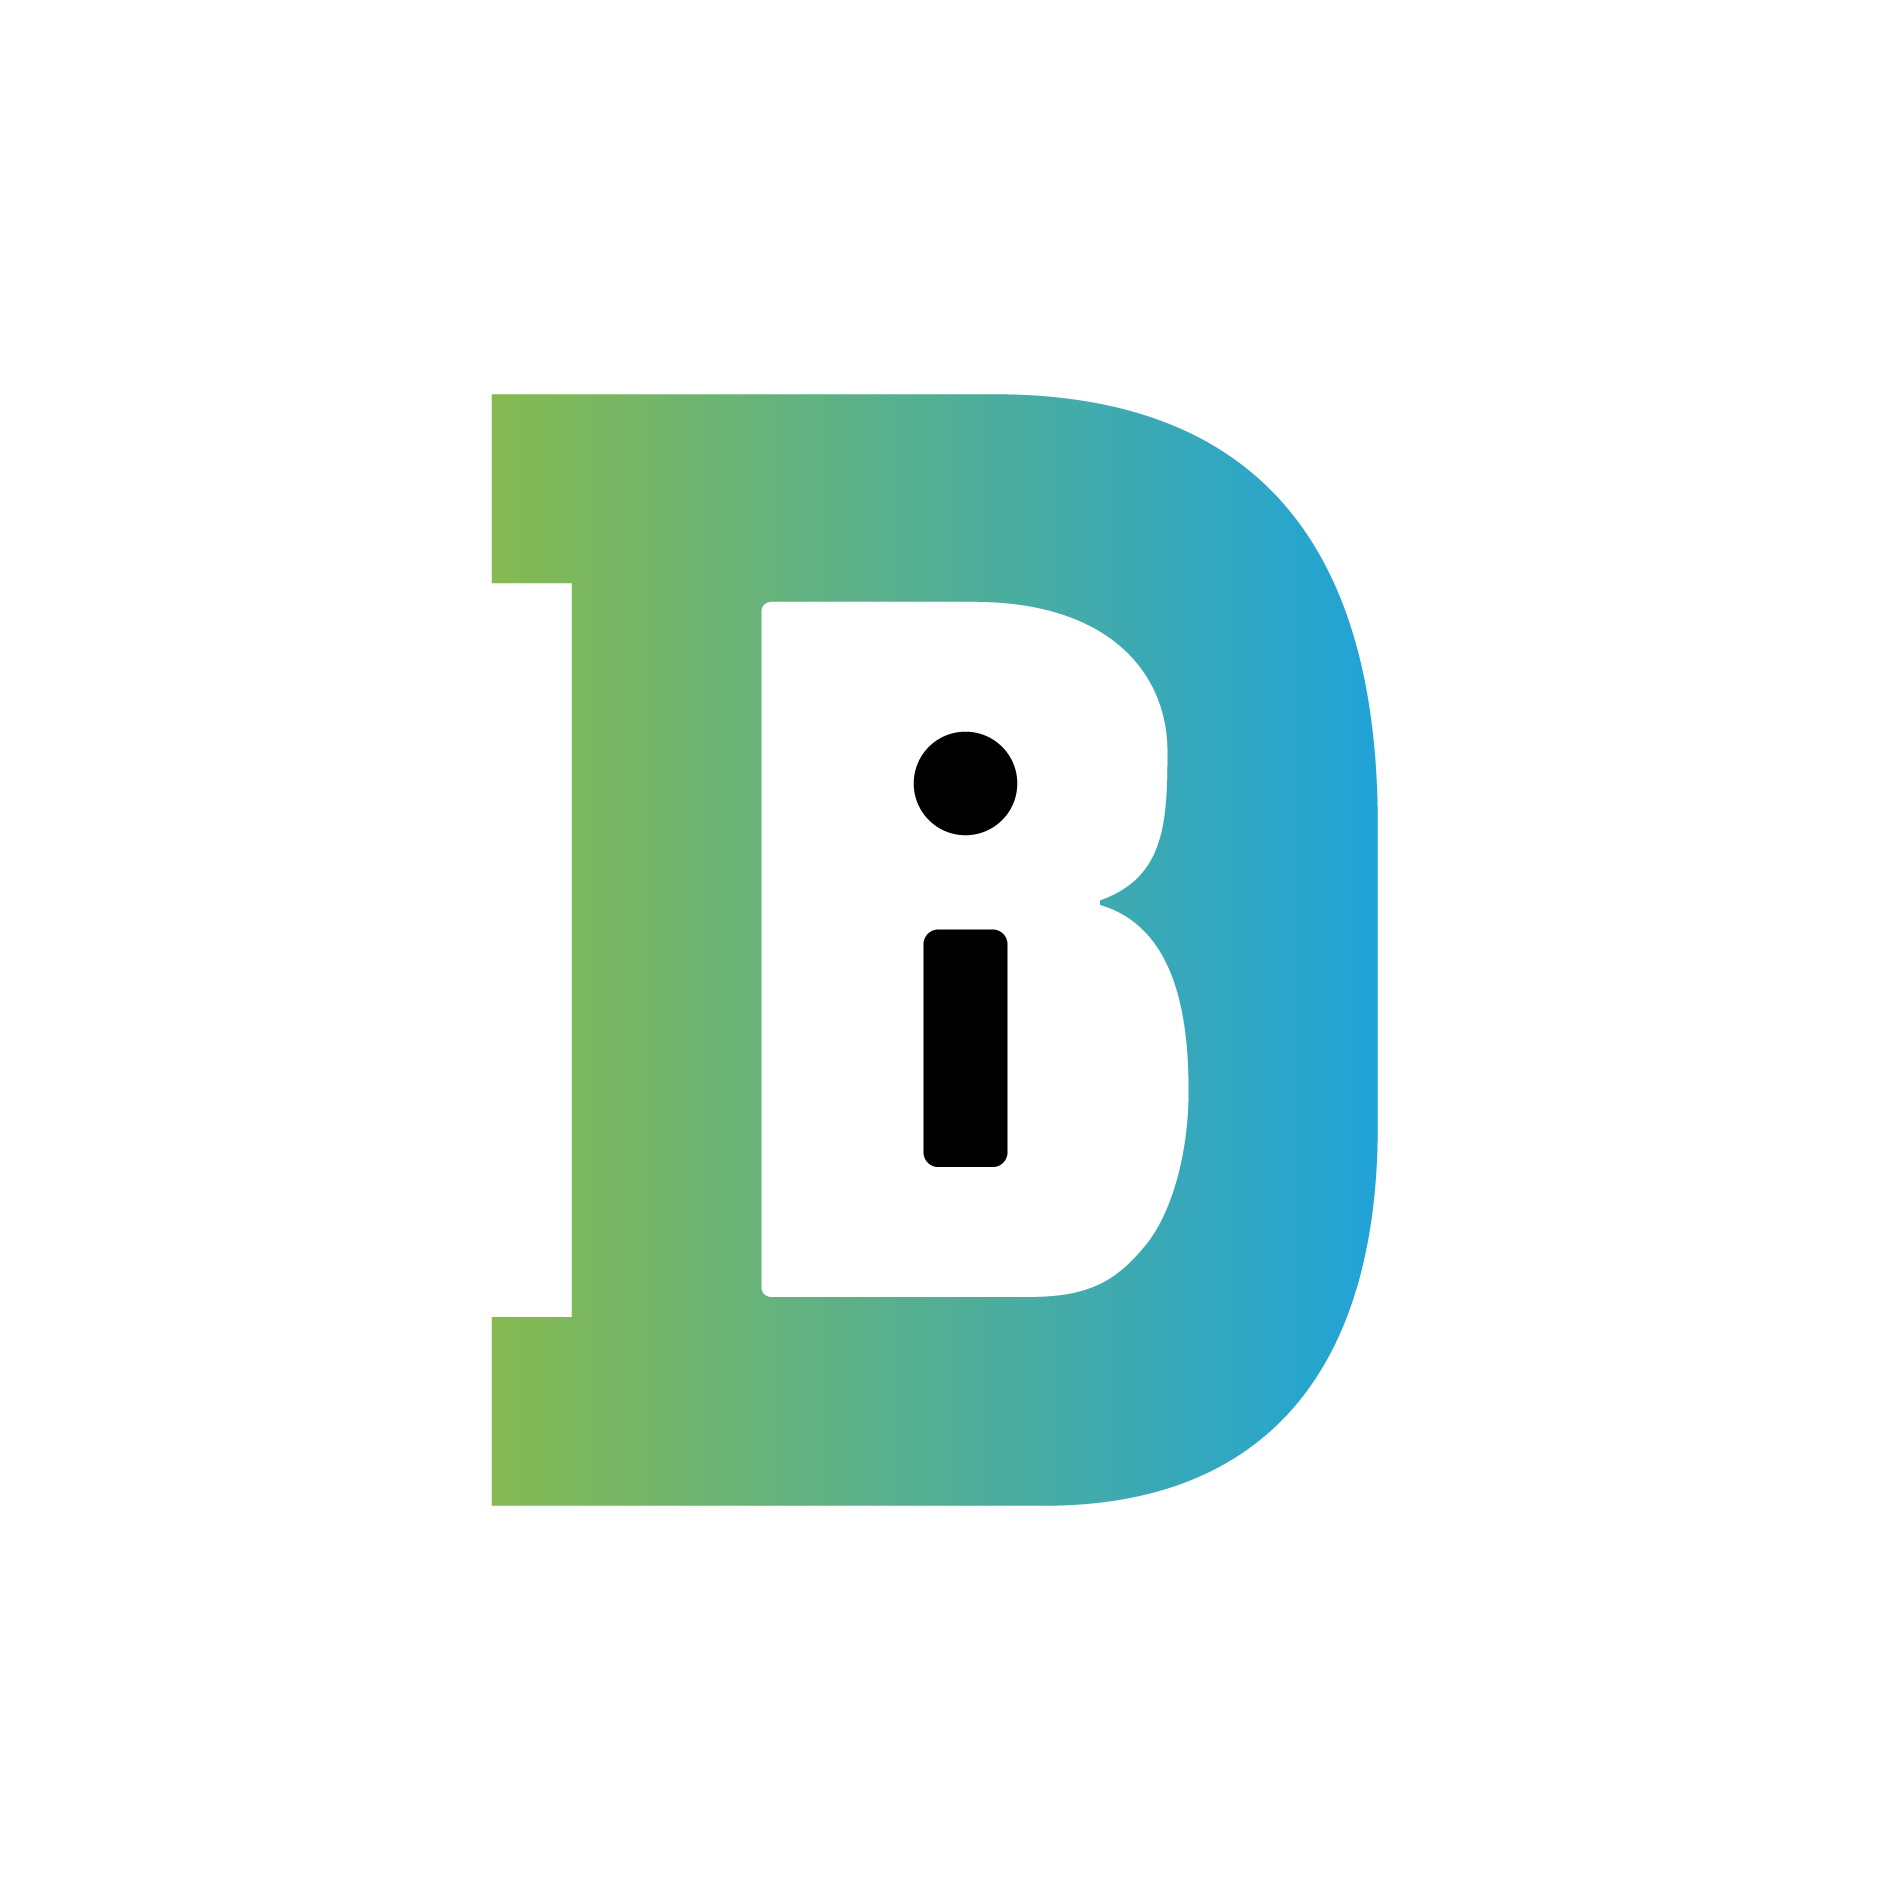 IBD logo - personal satisfaction for a real-world project with a personal connection